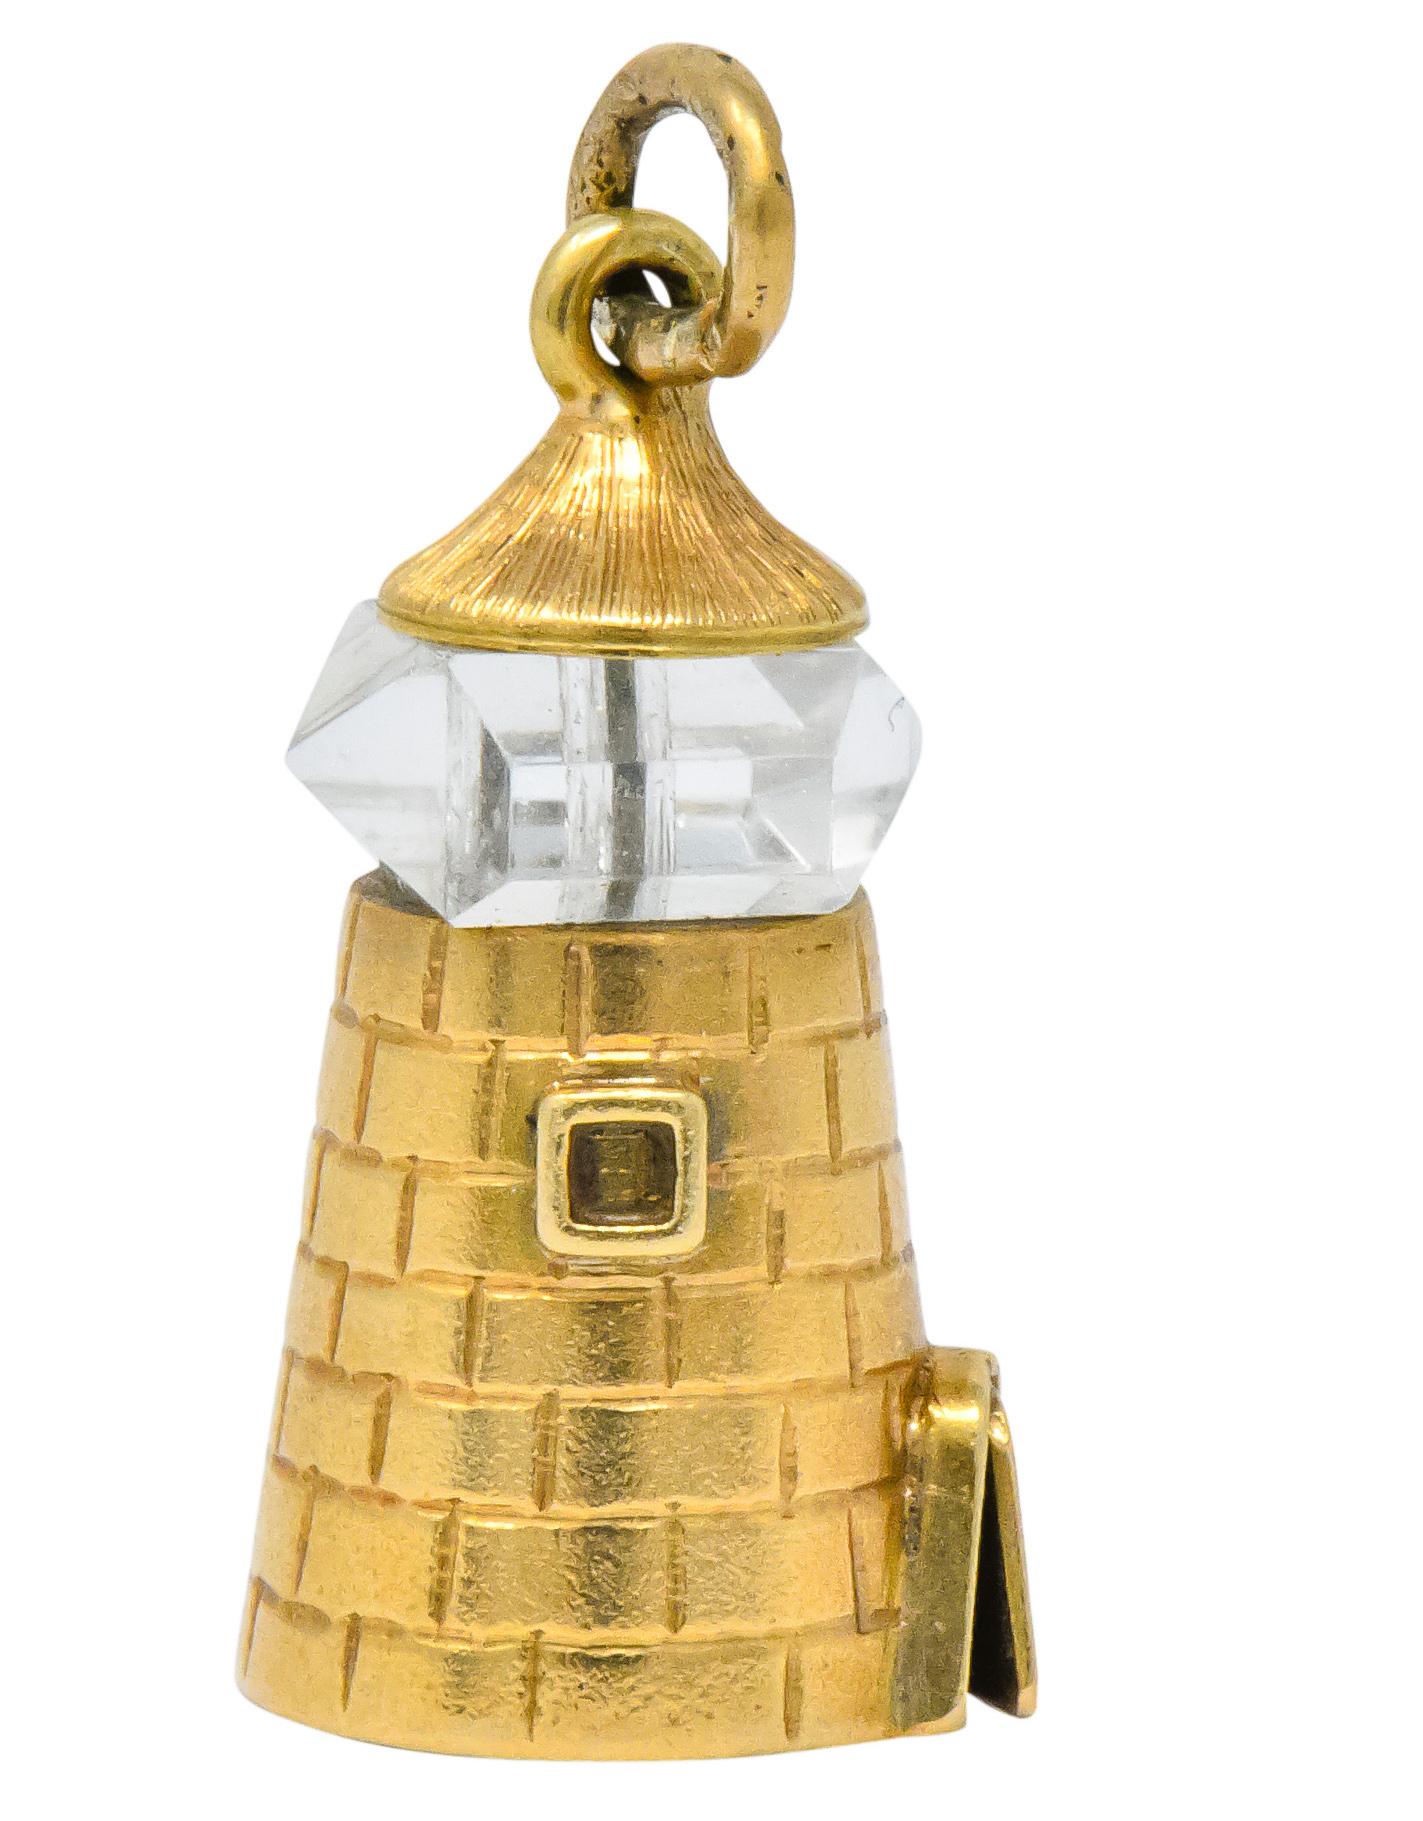 Lighthouse charm with engraved detailing and door slightly ajar

With faceted rock crystal bead that spins in place as lantern room

Stamped 14k for 14 karat gold

Measures: approx. 3/8 x 7/8 (including bale)

Circa 1910

Total weight: 2.3